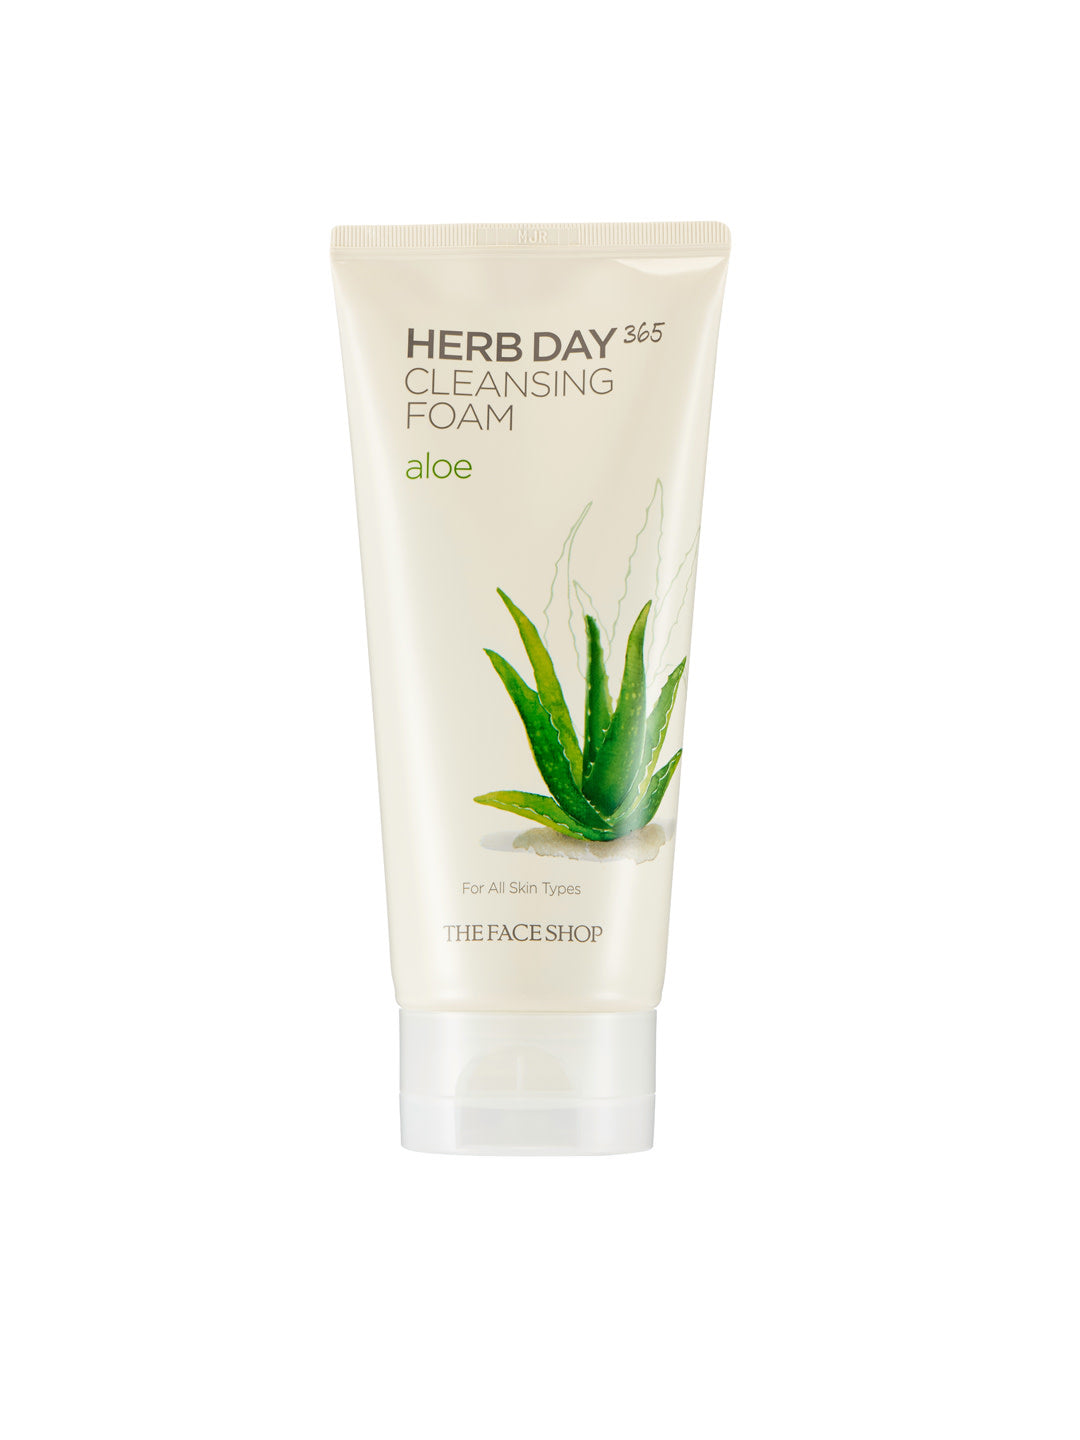 THE FACESHOP Herb Day 365 Cleansing Foam Aloe - Misumi Cosmetics Nepal